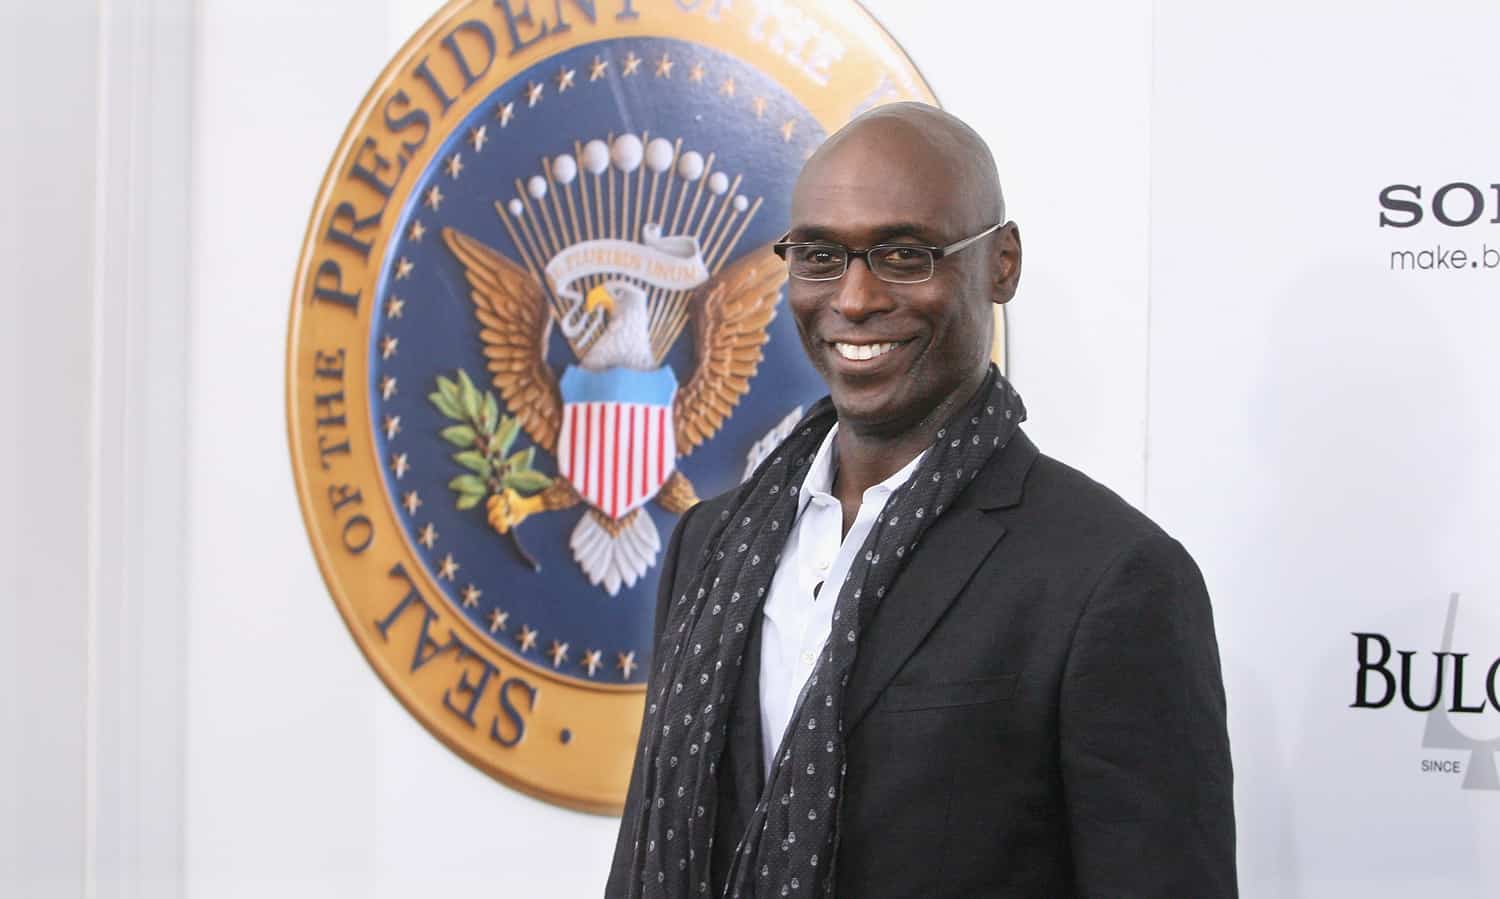 Lance Reddick in this image by Jim Spellman/WireImage